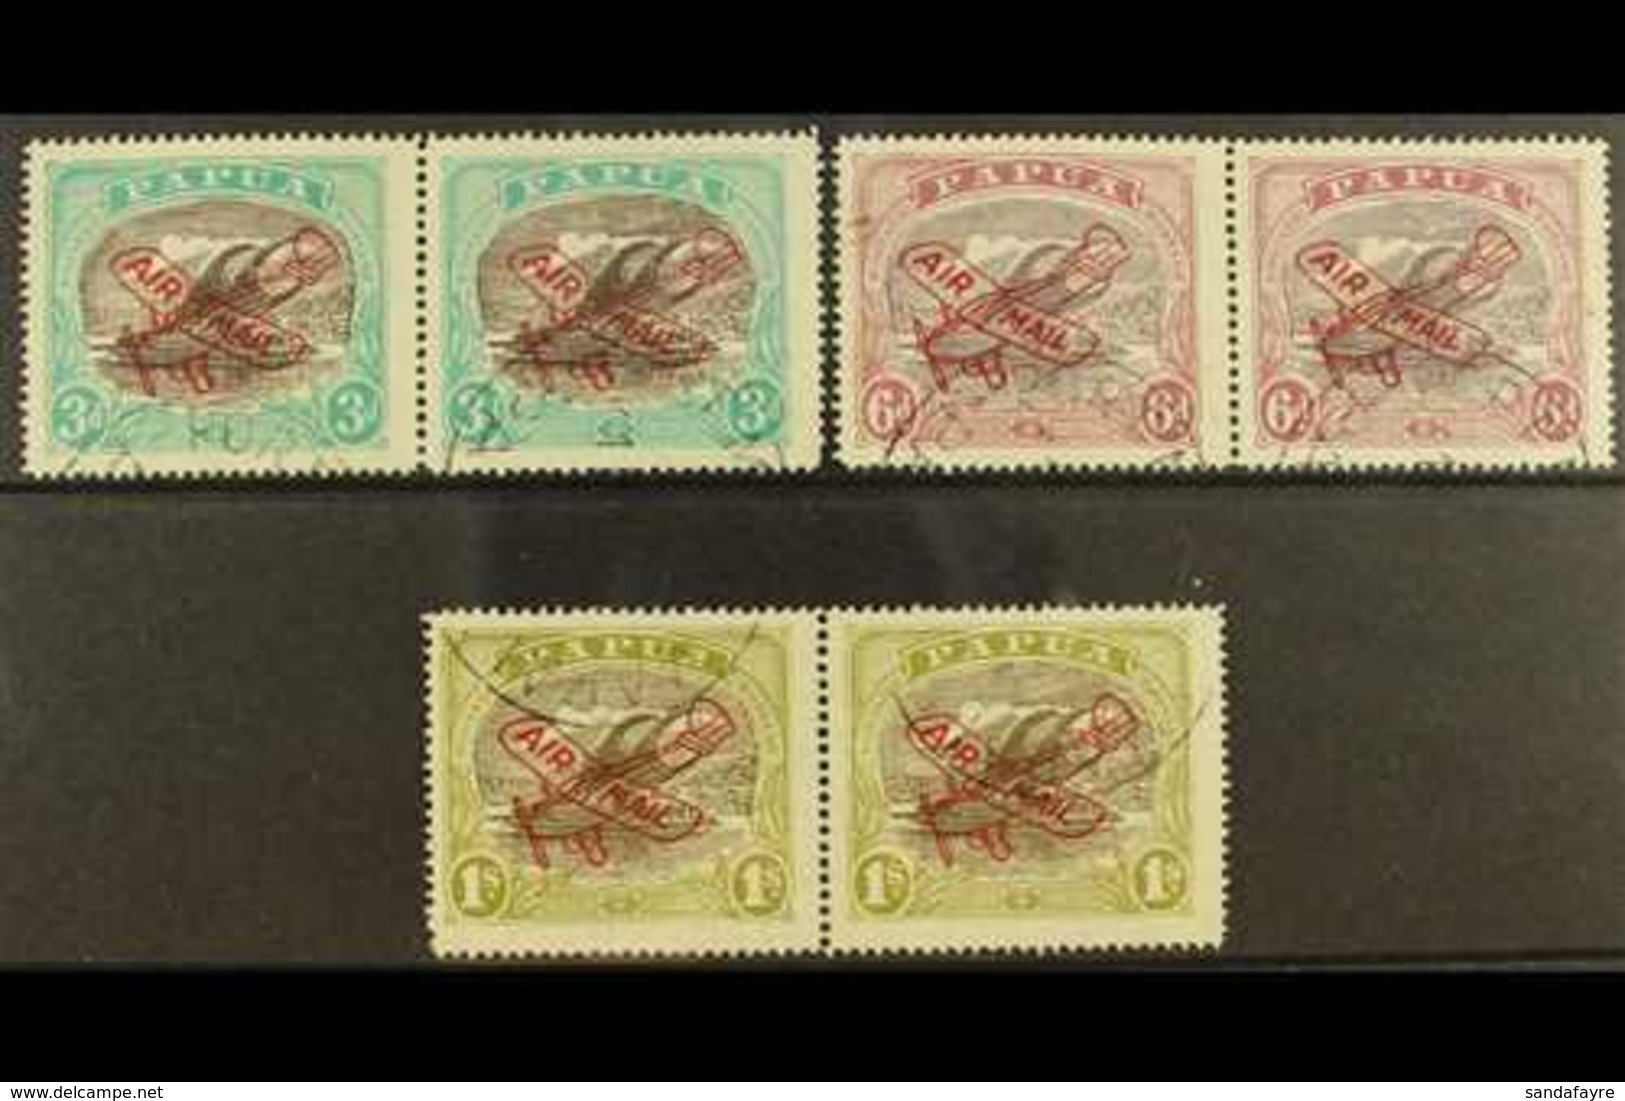 1930 Air Set, Ash Printing, SG 118-120, Each In A Horizontal Pair With One In Each Showing RIFT IN CLOUD, Fine Cds Used. - Papoea-Nieuw-Guinea